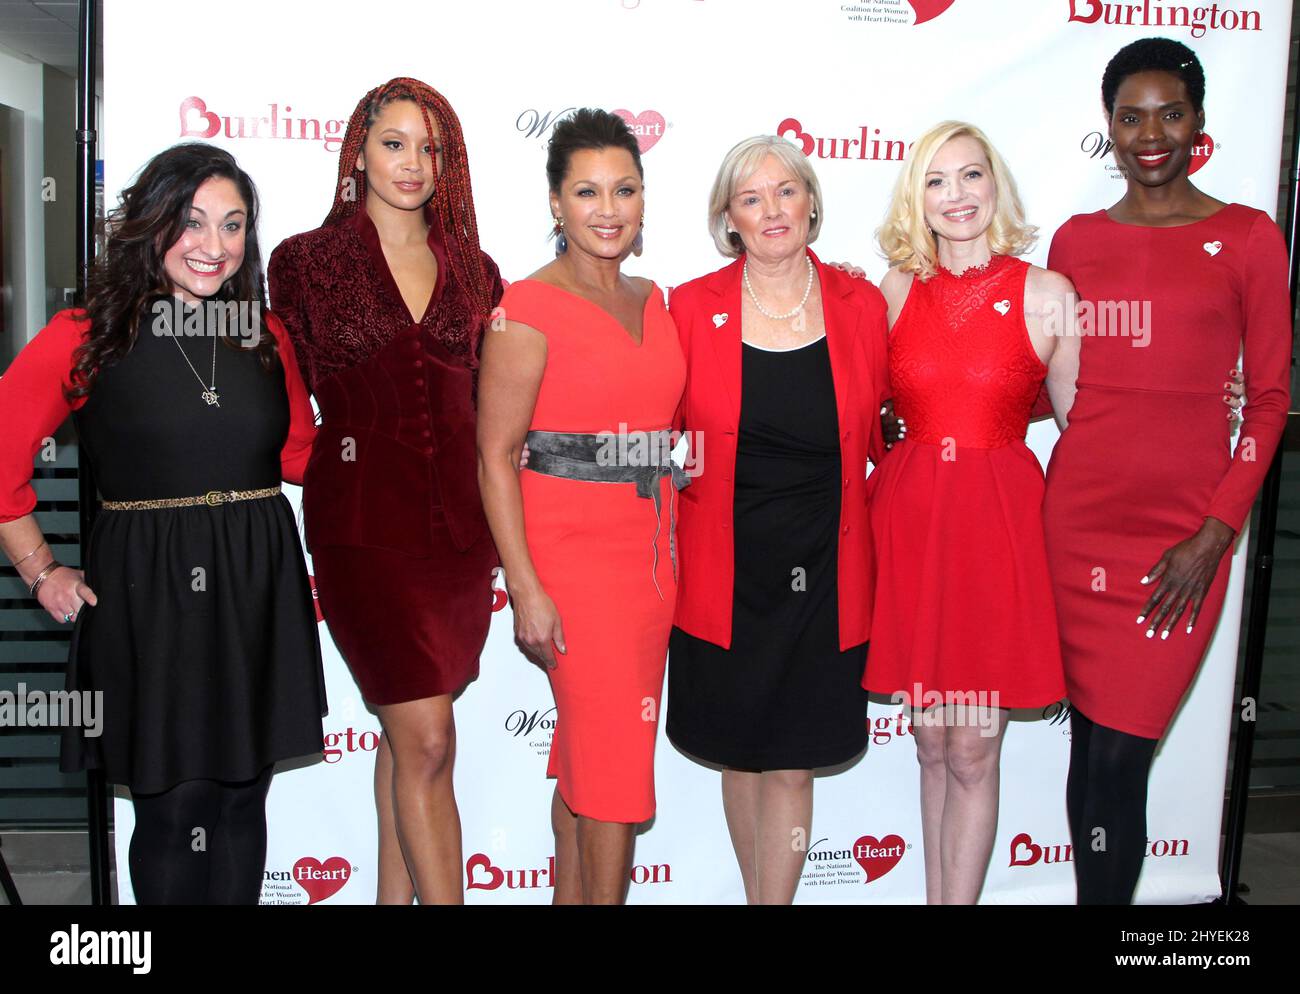 Vanessa Williams & Jillian Hervey with heart disease survivors as Vanessa Williams & Jillian Hervey Team Up With Burlington Stores & WomenHeart to Knock Out Heart Disease, held at Burlington Store Union Square on February 6, 2018 Stock Photo